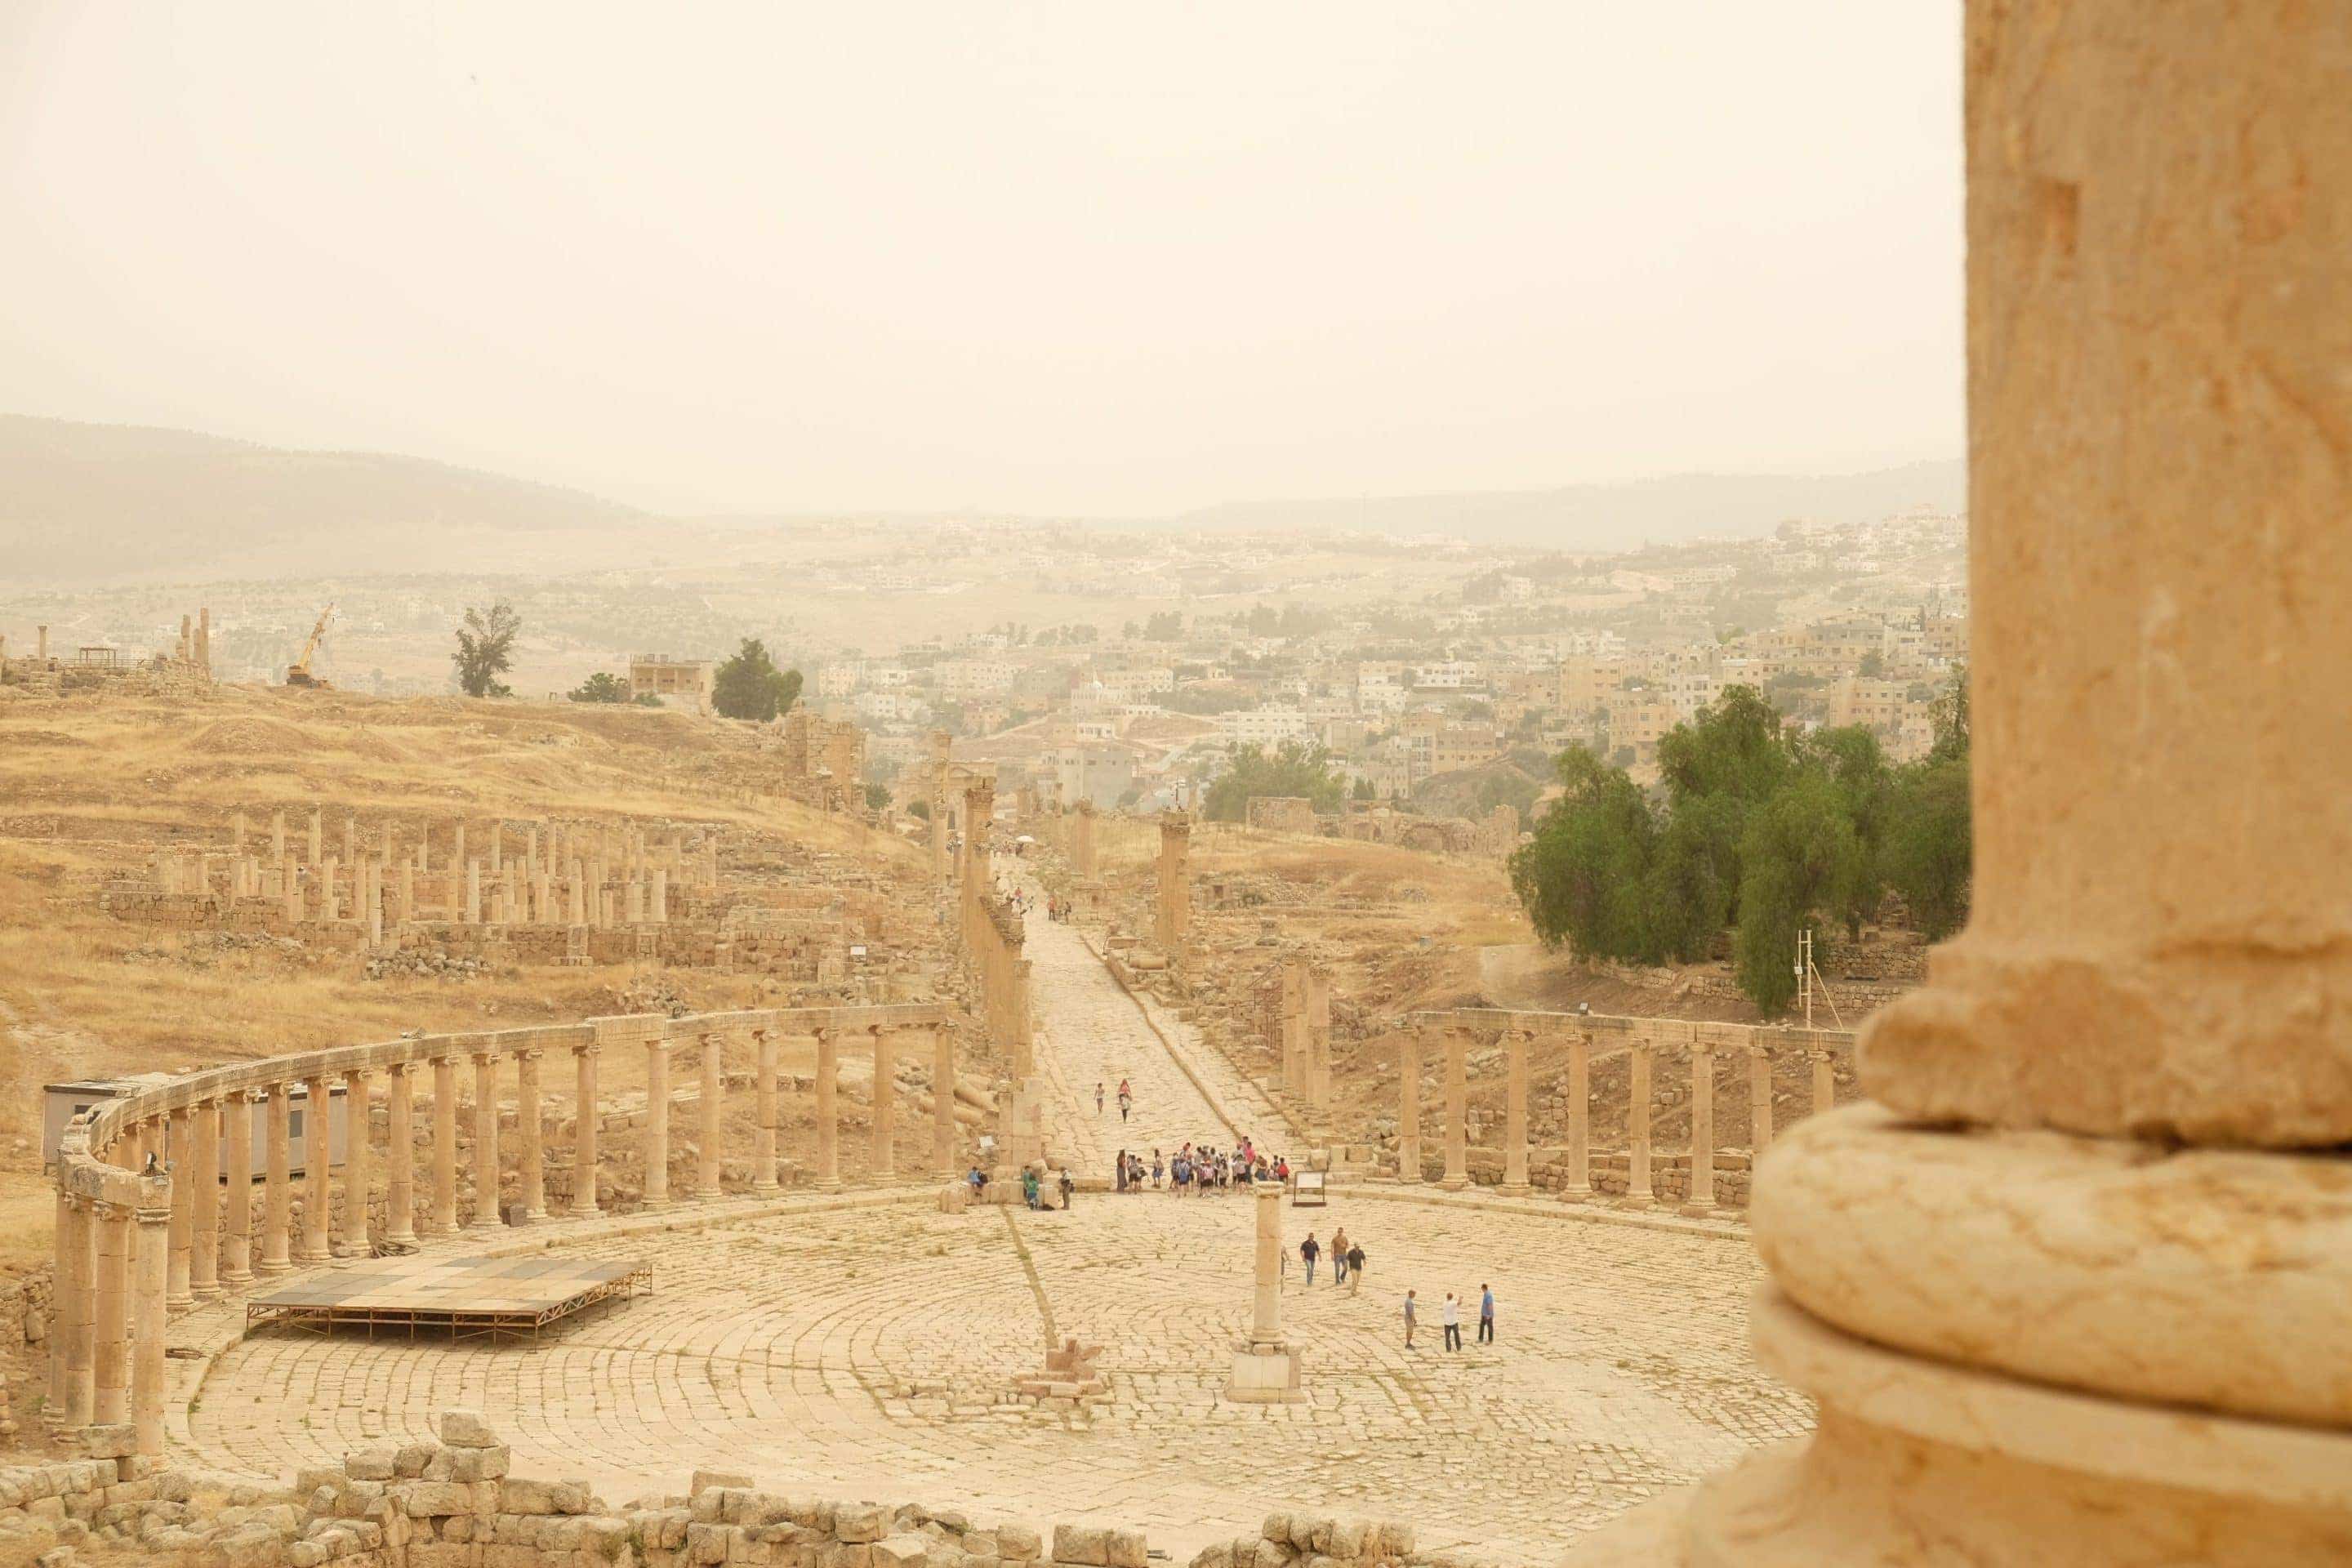 View of the Oval Plaza. Jerash is unique - not to many oval Greco-Roman plaza's out there in the world. Photo: Genevieve Hathaway Photography